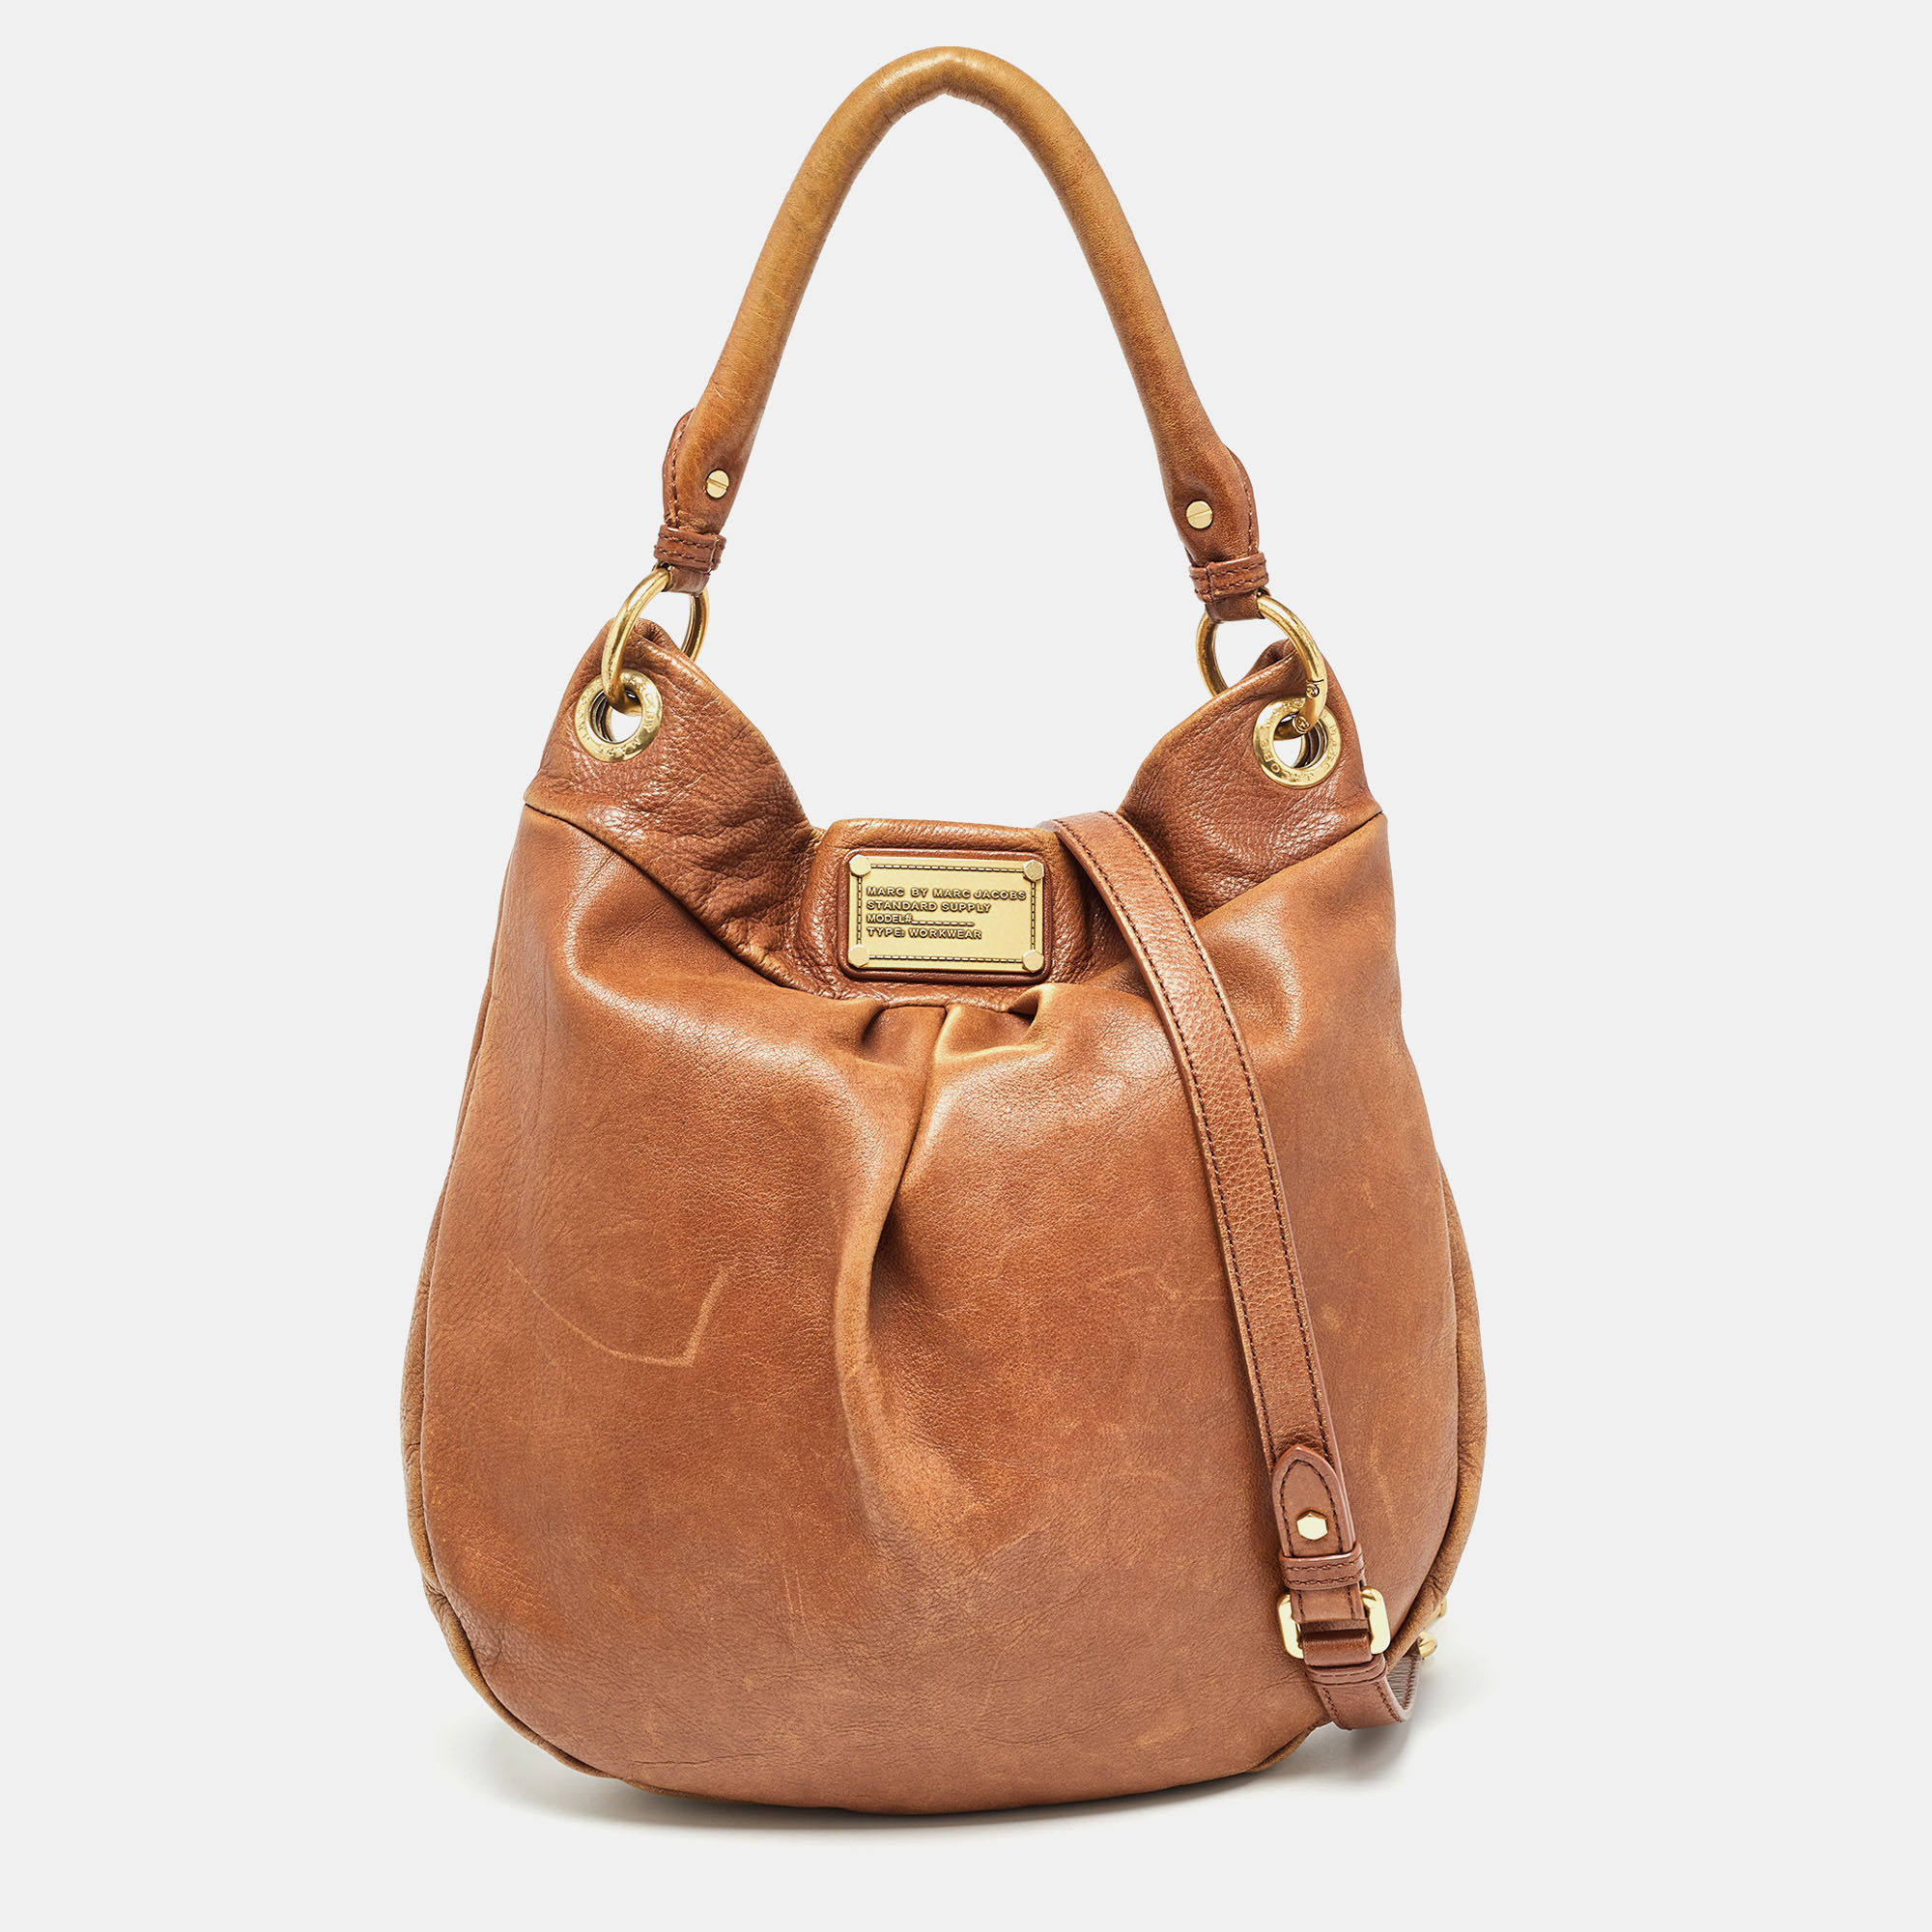 Marc by marc jacobs brown leather classic q hillier hobo